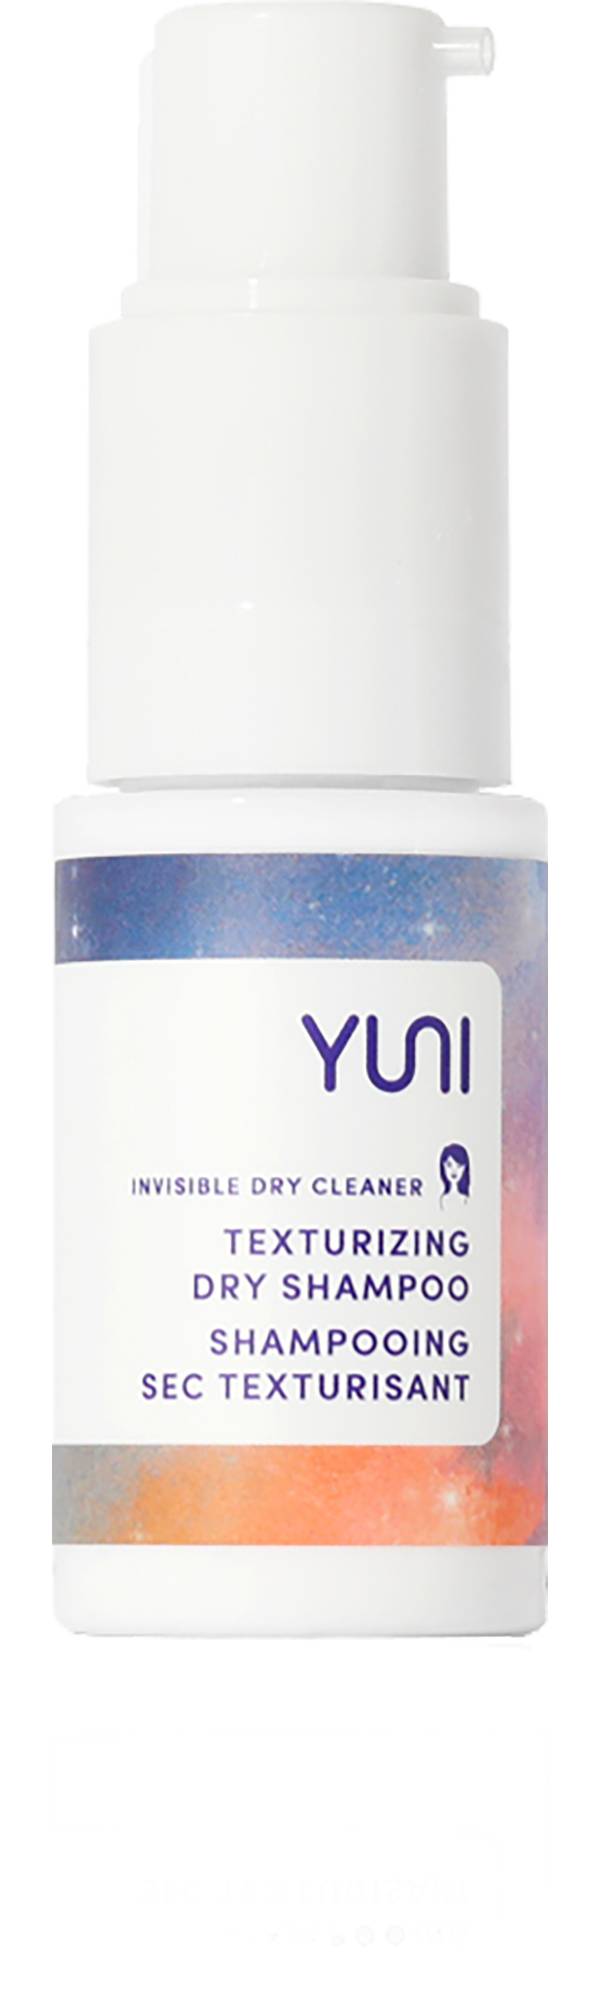 YUNI Beauty Invisible Dry Cleaner Texturizing Dry Shampoo product image